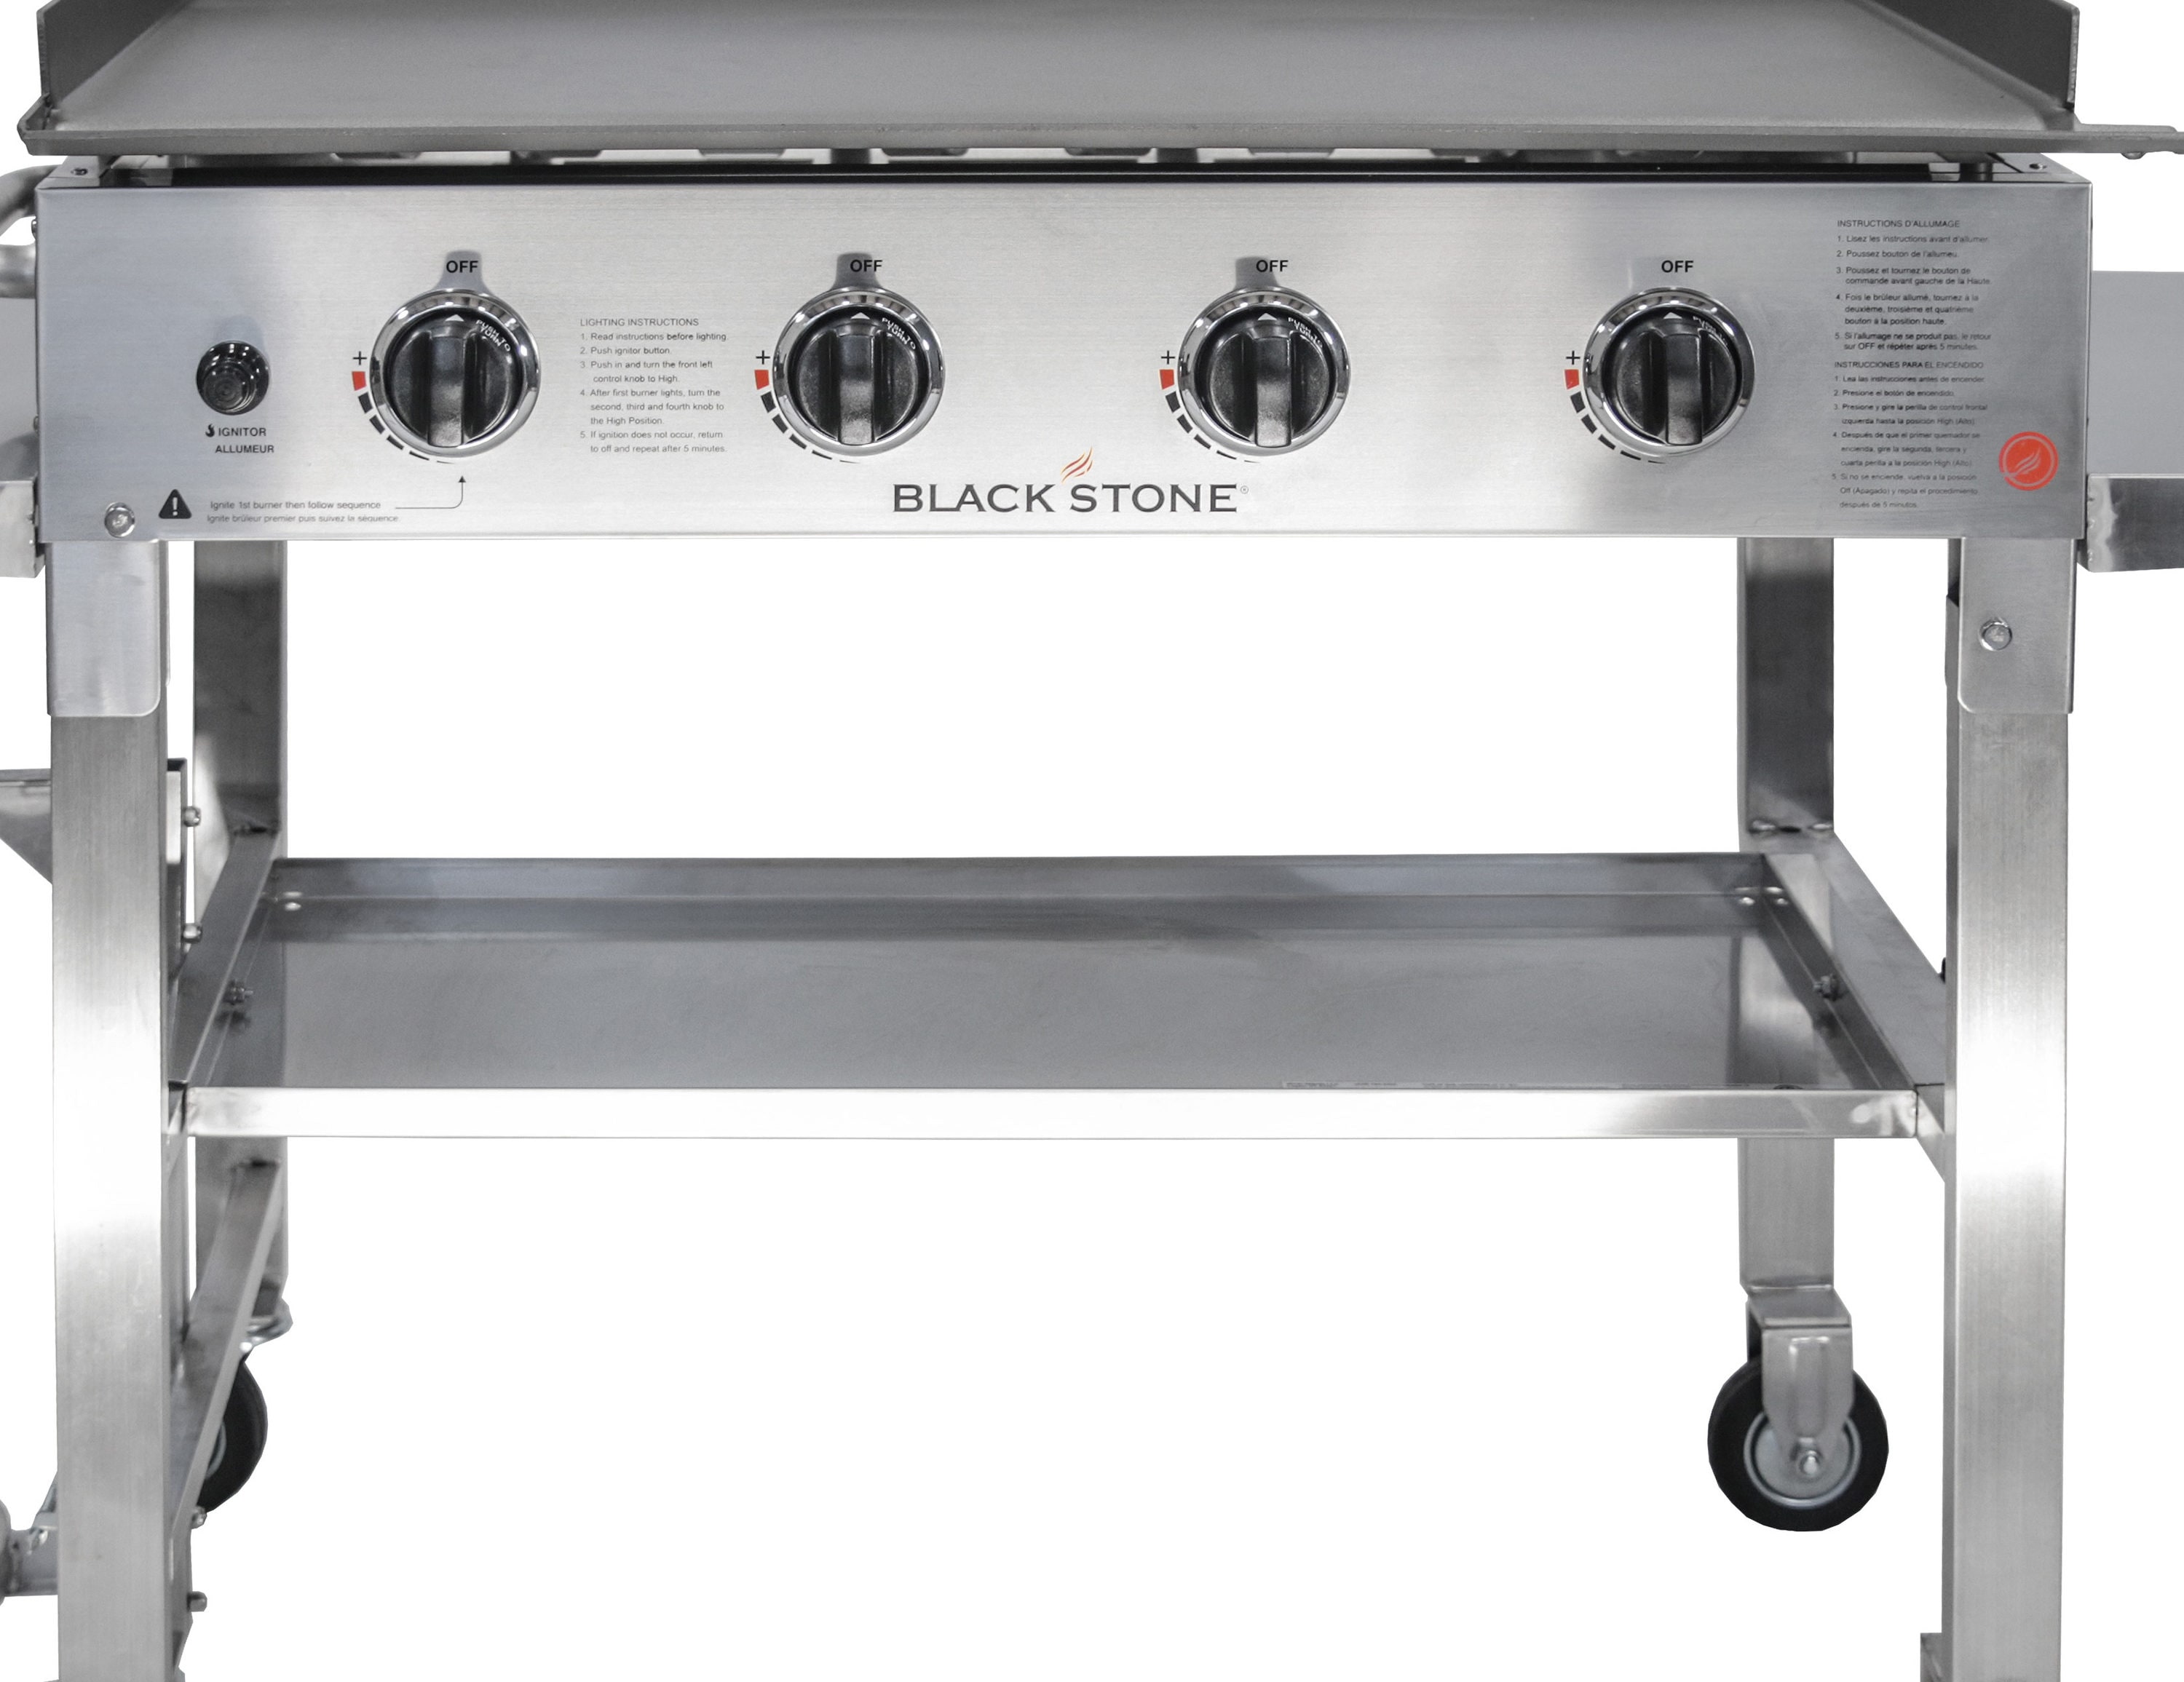 WoodEze 4-Burner Flat Top Griddle GAS Grill - Black and Stainless Steel